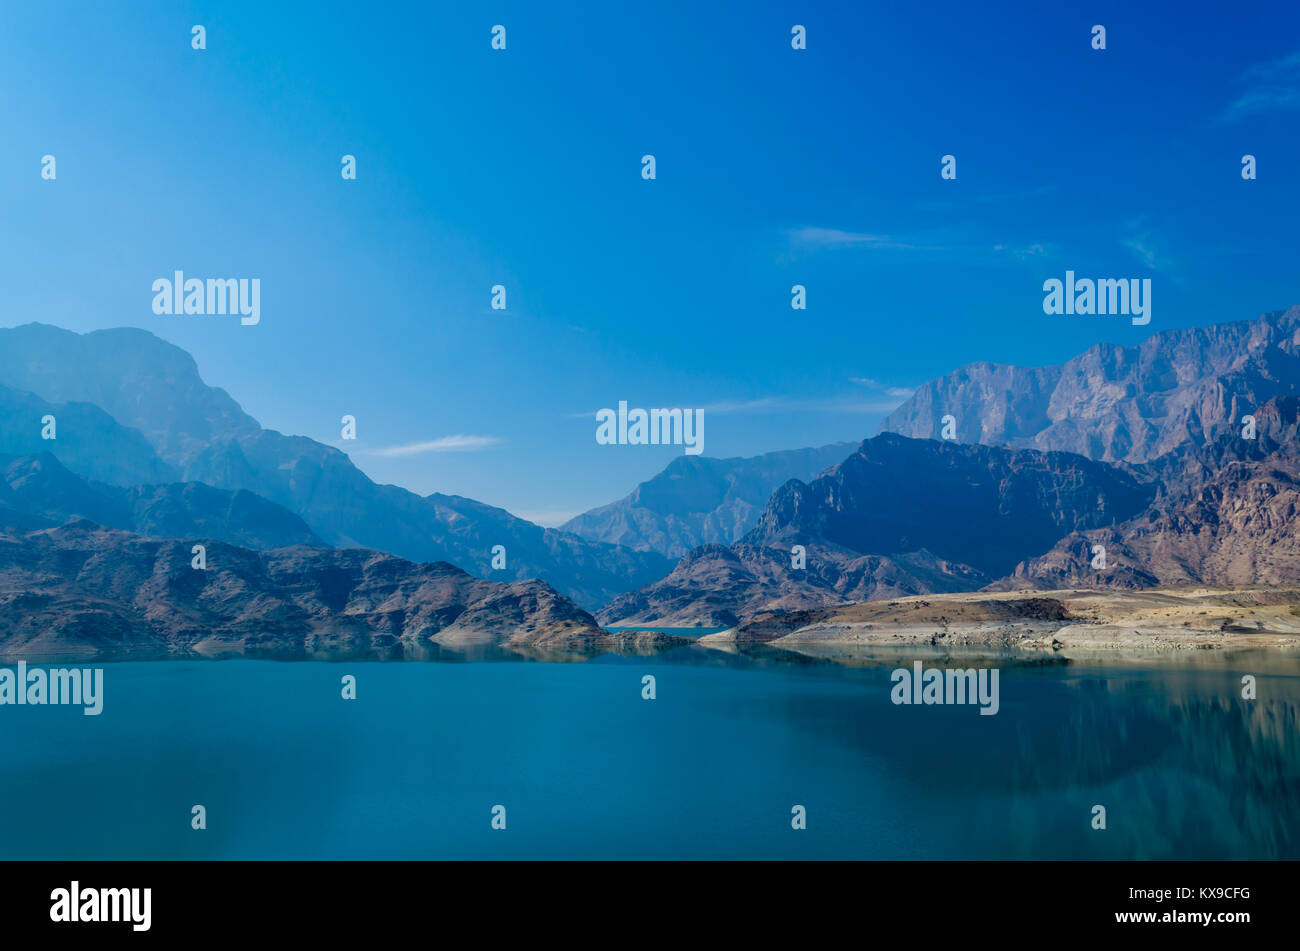 Waterscape with calm waters with reflection, mountains and blue sky on a bright sunny day, in Muscat, Oman. Stock Photo